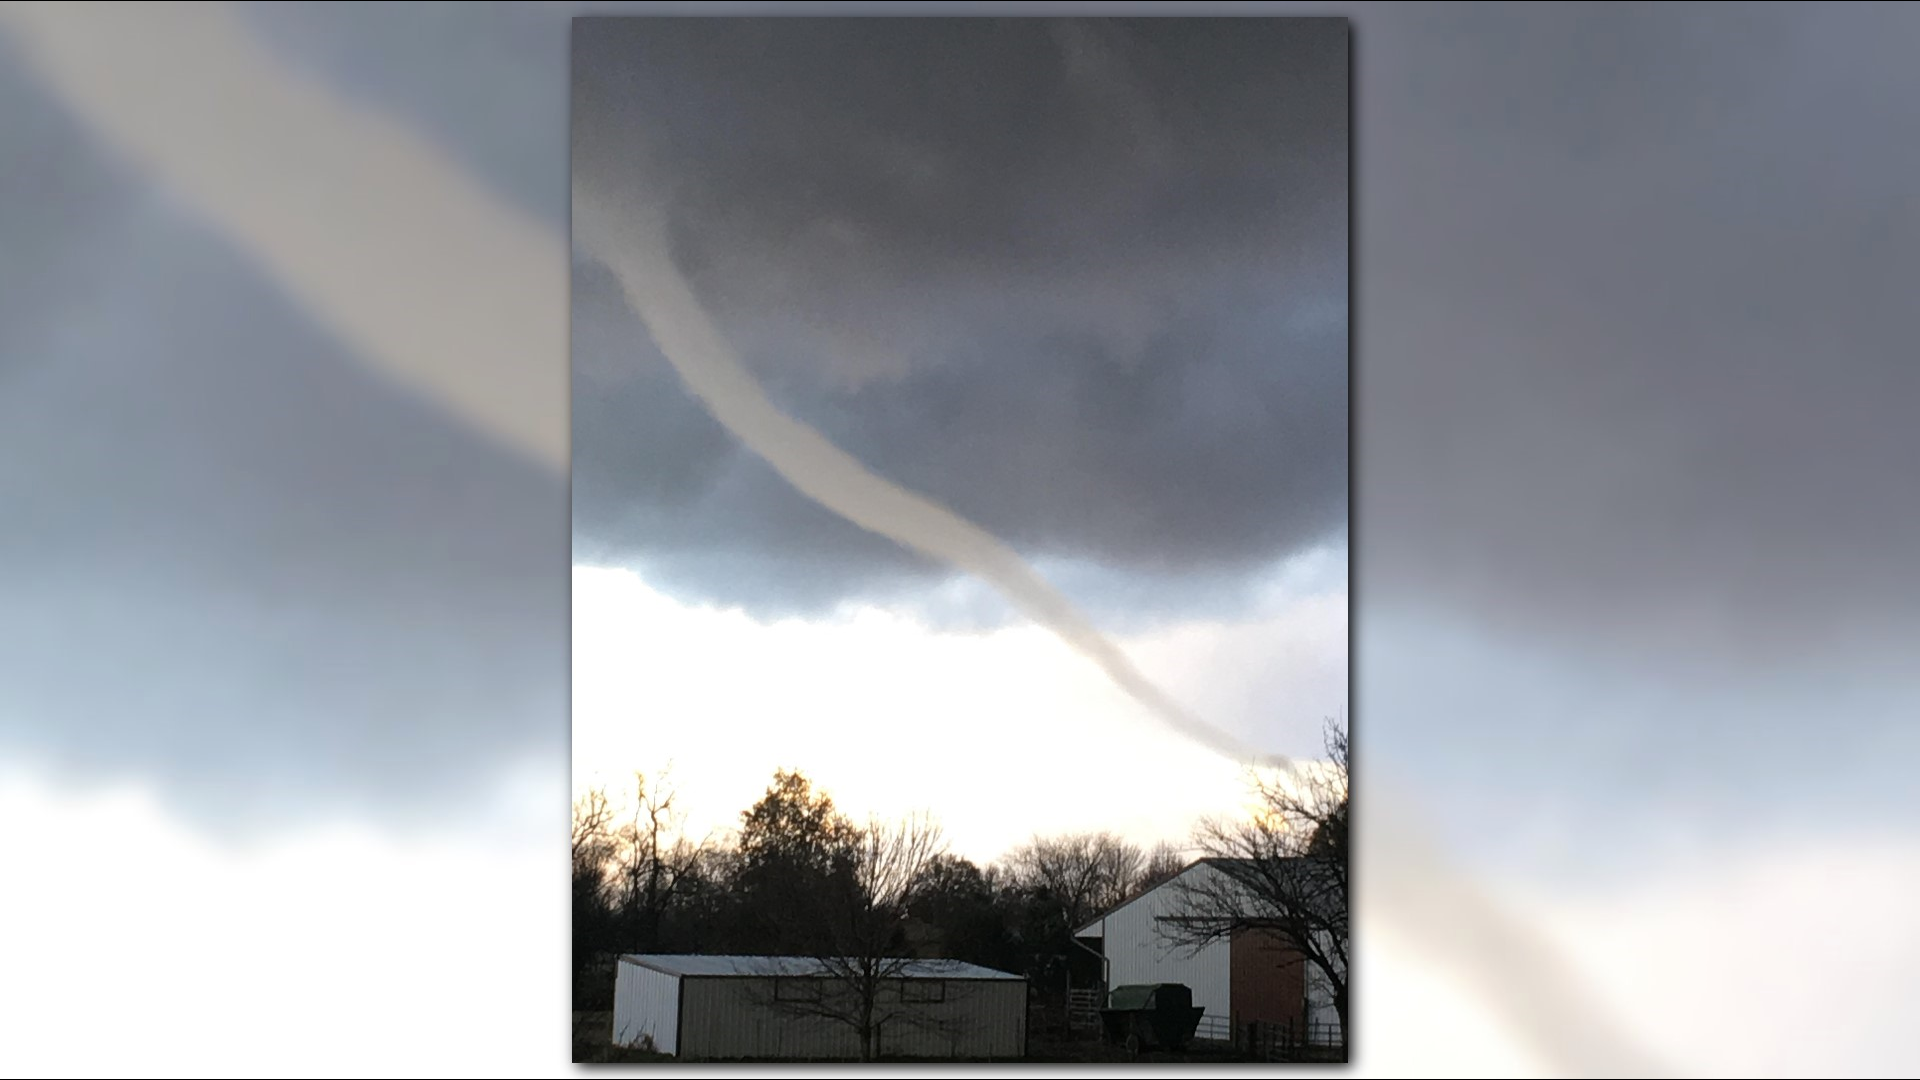 Saturdays Swarm Of Tornadoes Sets Record In Illinois